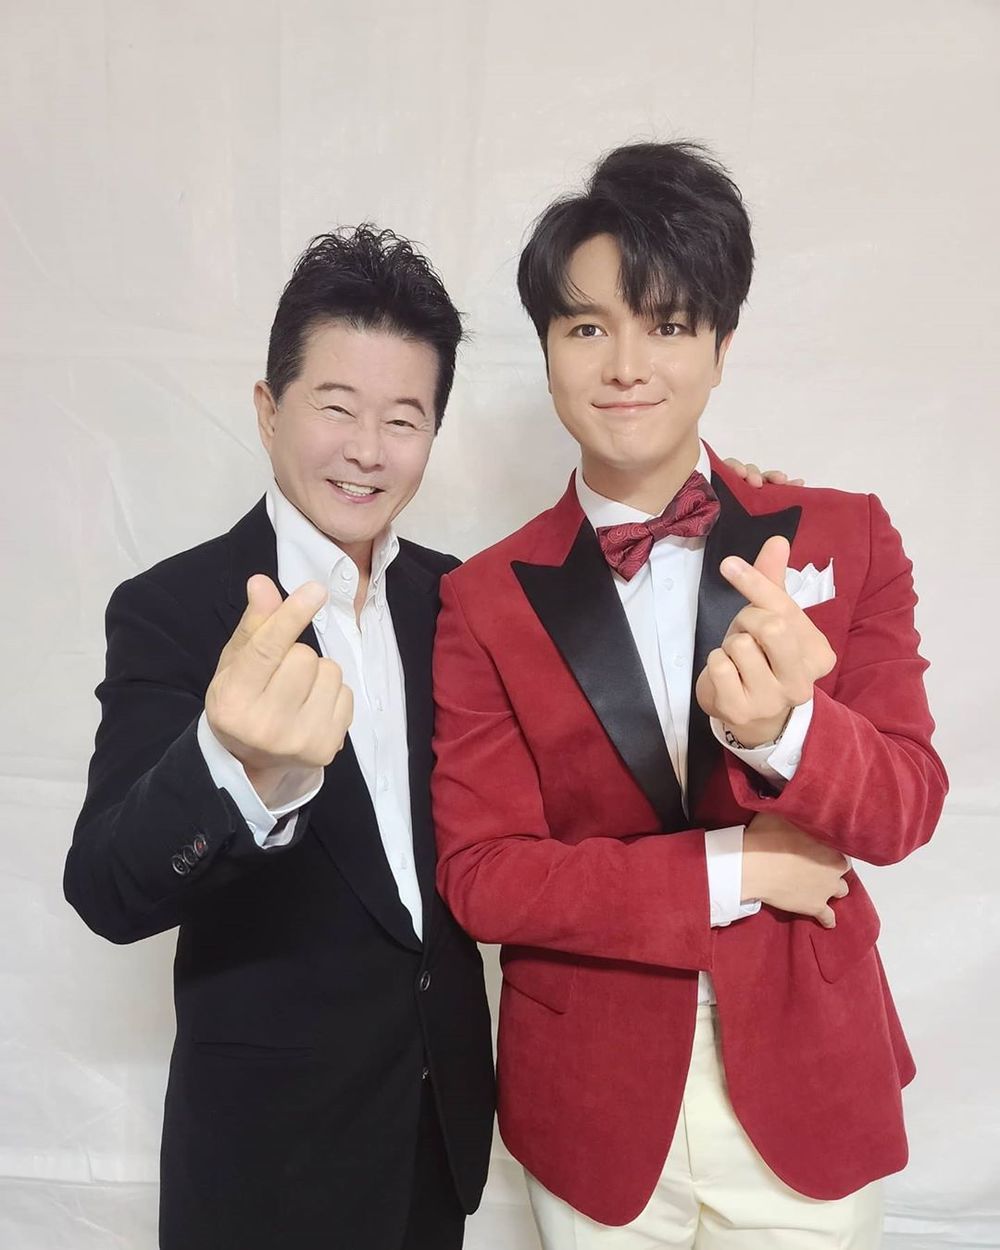 Musical actor and singer newcomer released a photo taken with Tae Jin-ah.On October 12, Shin In-sun said to his instagram, #Tae Jin-ah # I love you # Shin In-sun #Tae Jin-ah Rainbow 7 and was praised by Tae Jin-ah. Haha Yellow Love is great Mr. Trot Bumblebee Whiting! Thank you very much. Singer #musical actor #Mr.Trot #Tomorrow is Mr. Trot #Mr. Trot Awards #2020Mr.Trot Awards # Jinjinja # Love is anyone # Partner # Ok Kyung # Sorry # Too many 20201001 # Fresh # Samo Song and posted a picture with the article.In the open photo, the rookie poses with a hand heart with Tae Jin-ah, especially the two affectionate figures, which have been warm.On the other hand, Shin In-sun appeared on KBS1s Morning Yard and made headlines by mentioning his fathers story. Shin In-suns father is a former lawmaker and lawyer, Shin Ki-nam.Yeji Lee